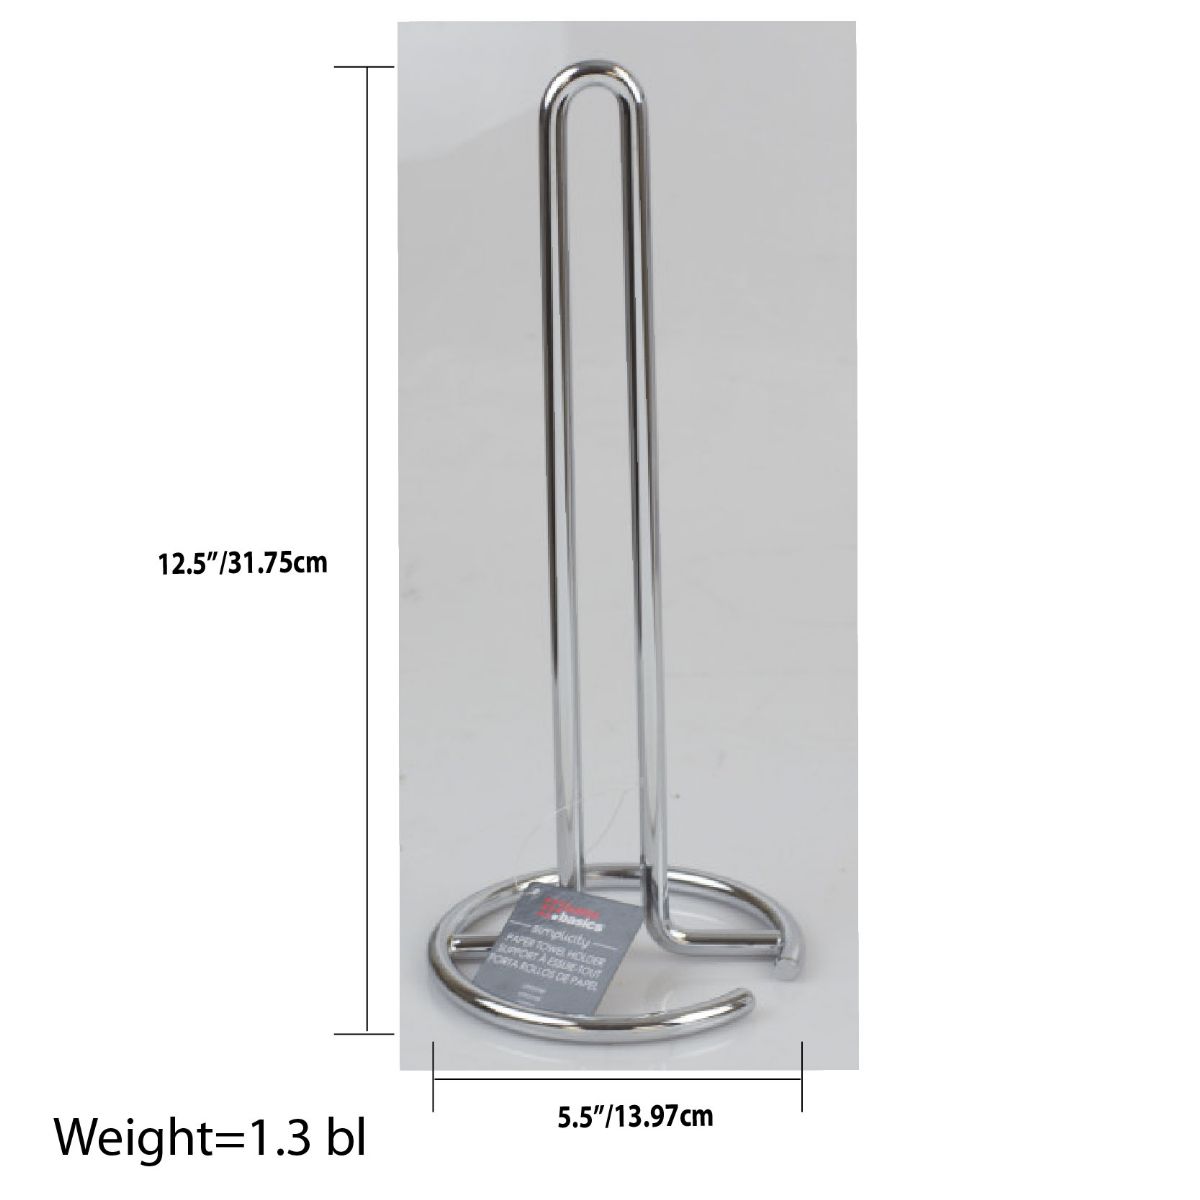 Home Basics Simplicity Collection Free-Standing Paper Towel Holder, Chrome